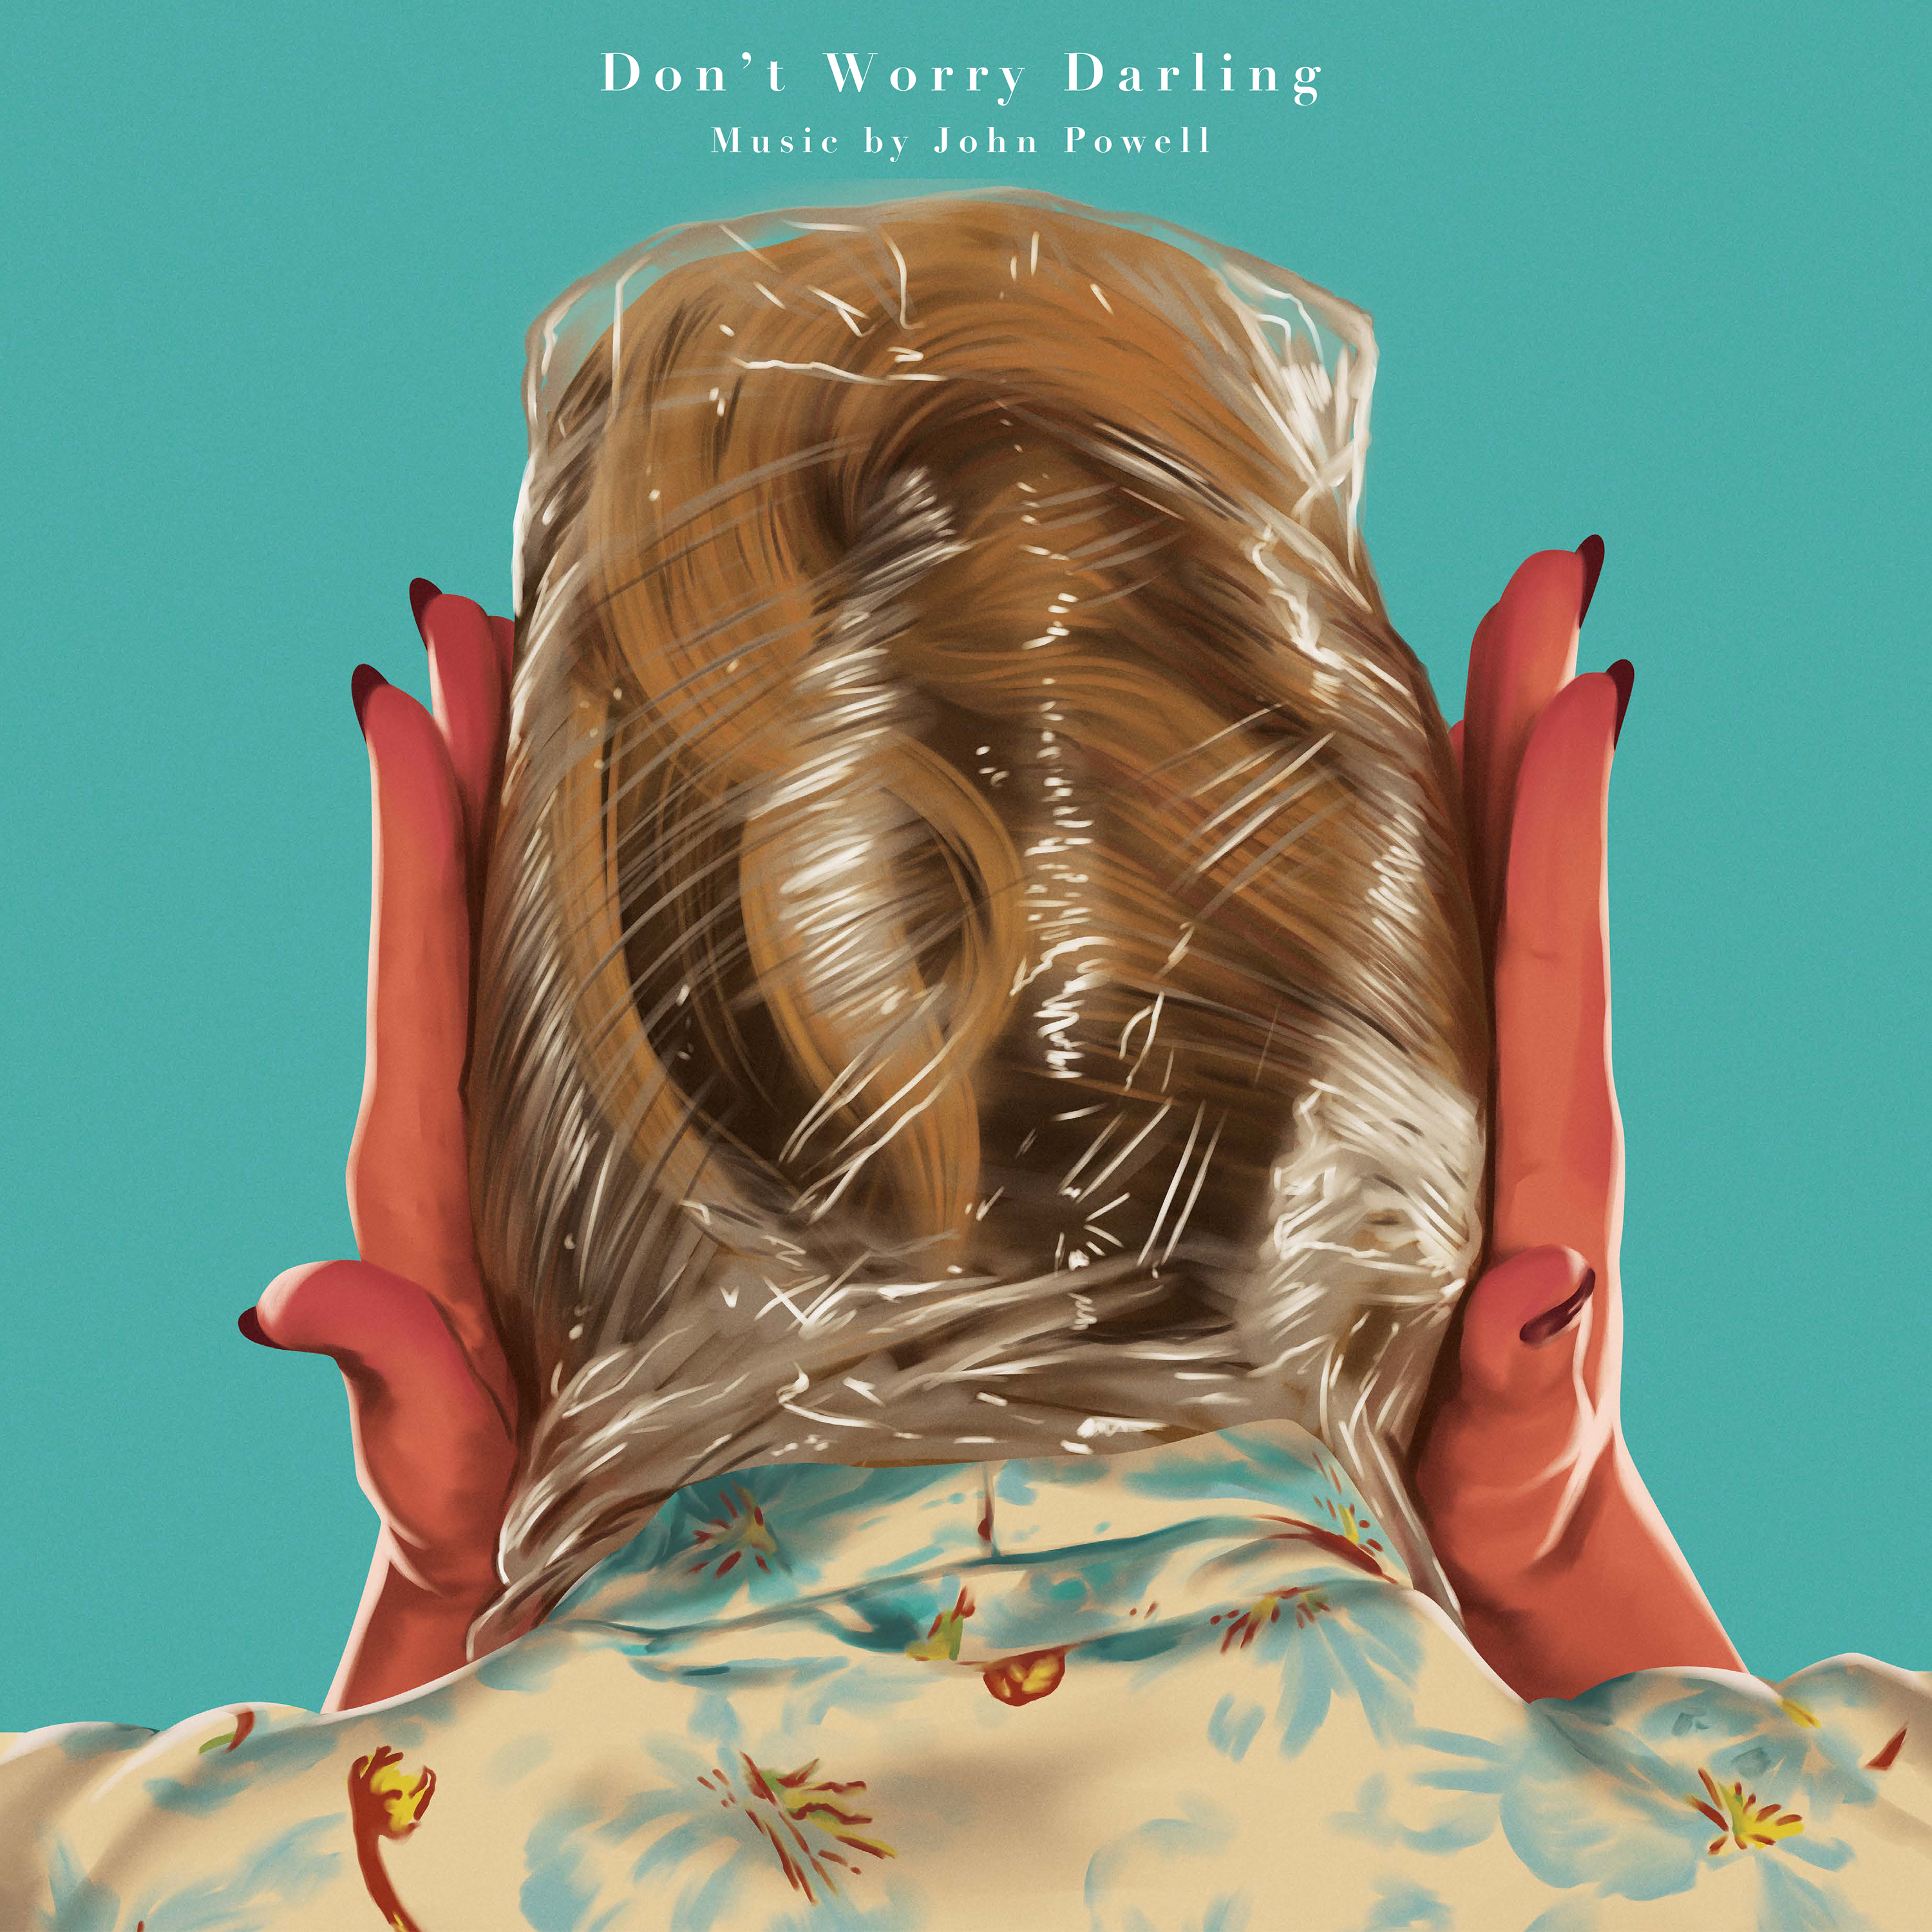 Don't Worry Darling - a mini movie review